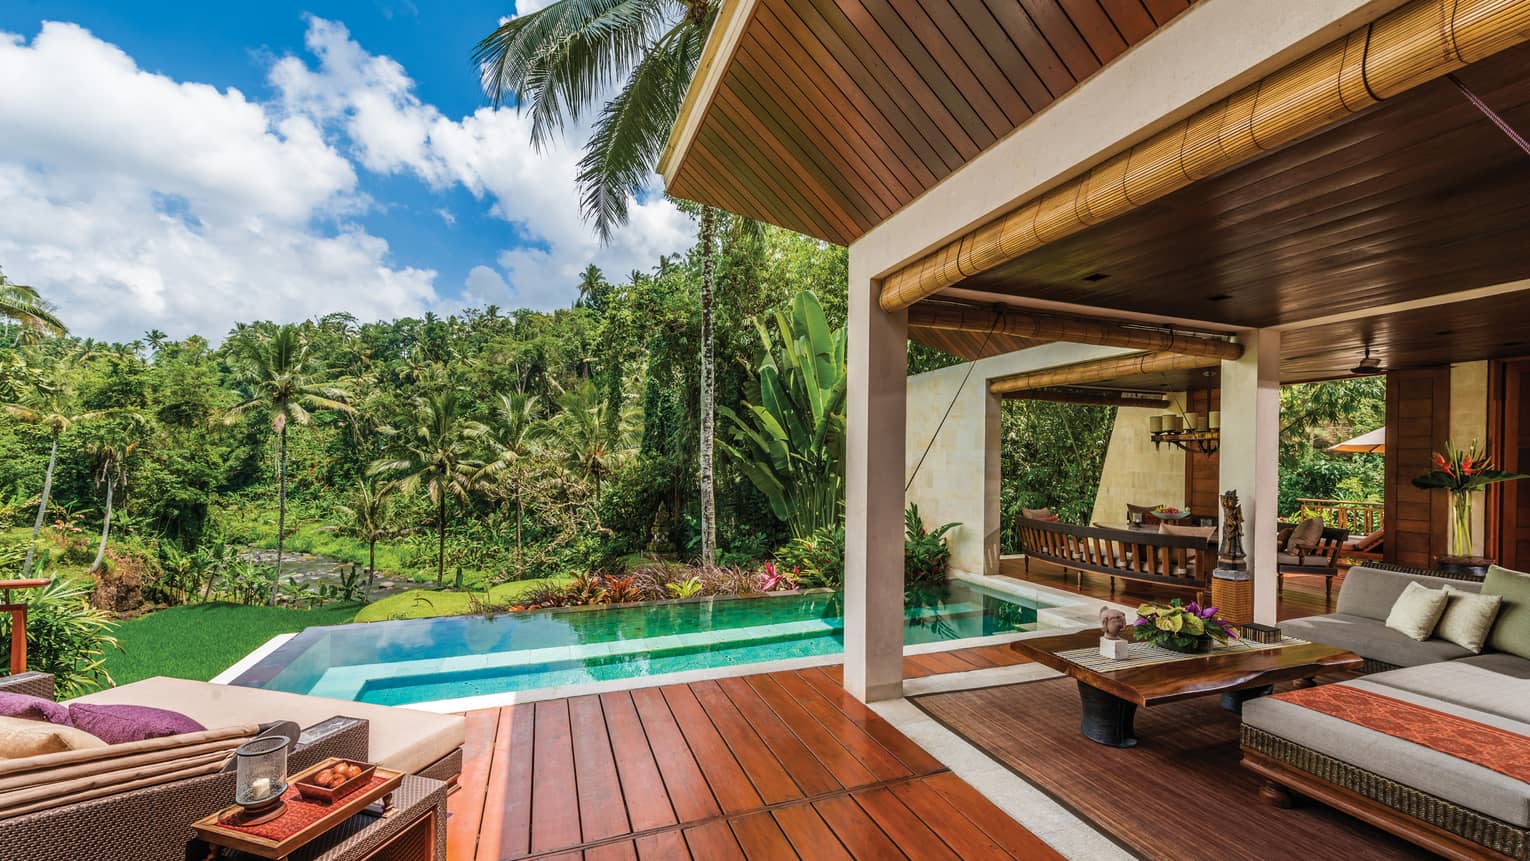 River-View Two Bedroom Villa patio with wood deck, blue plunge pool, large patio sofas with cushions, forest views